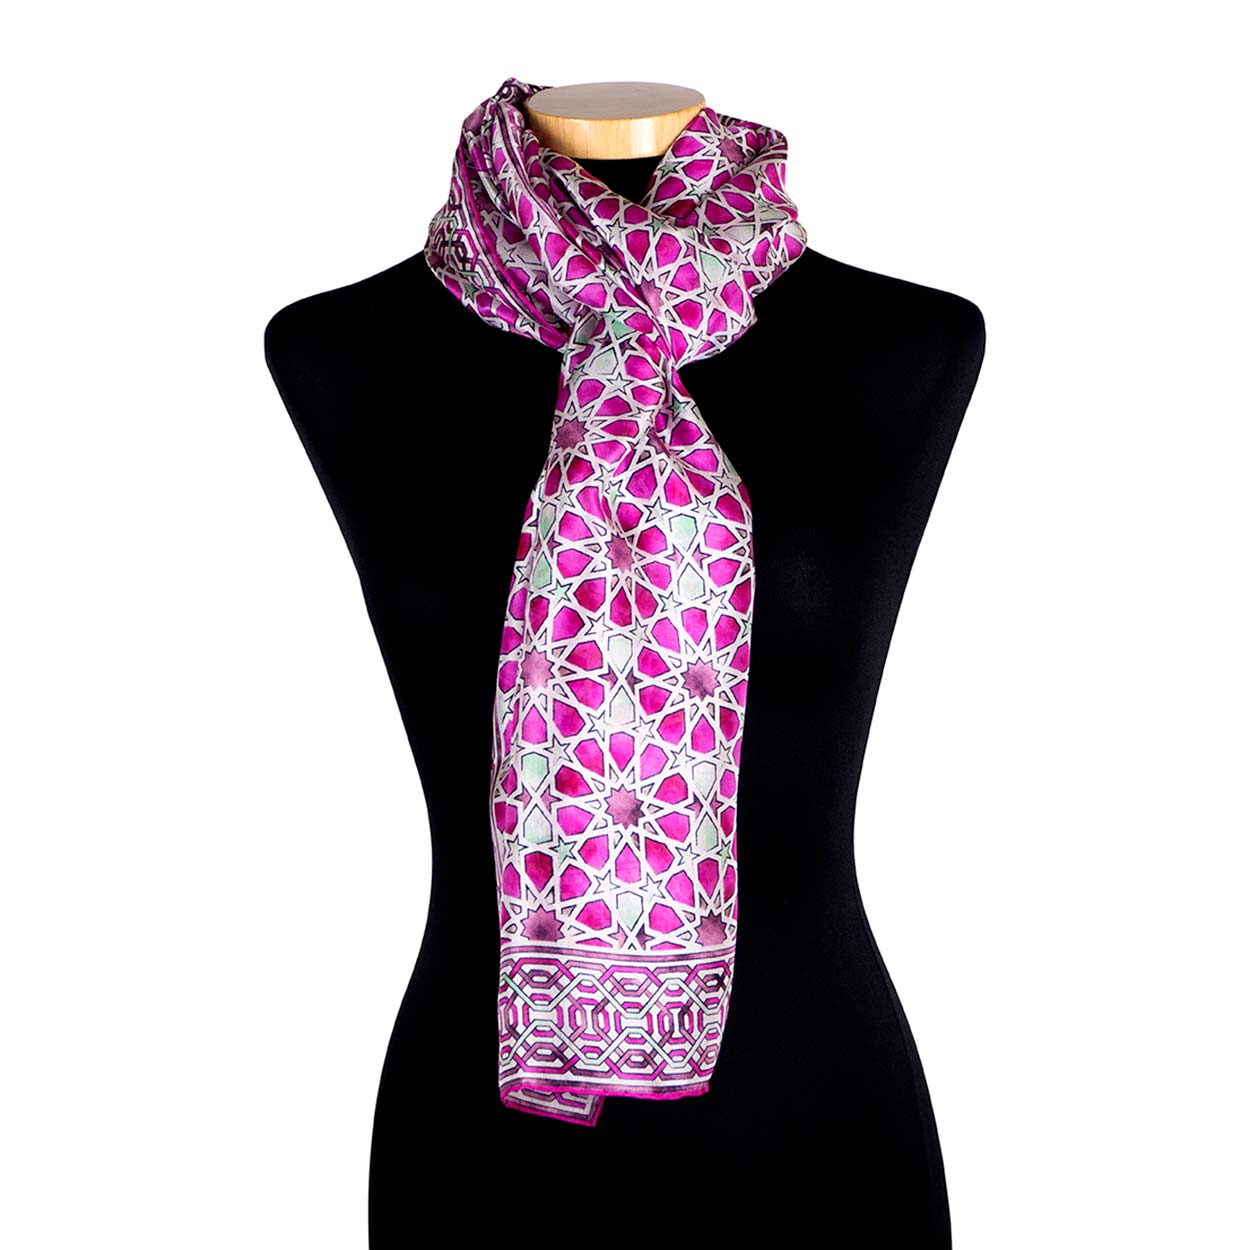 Pink neckerchief with geometric print inspired by Islamic Art